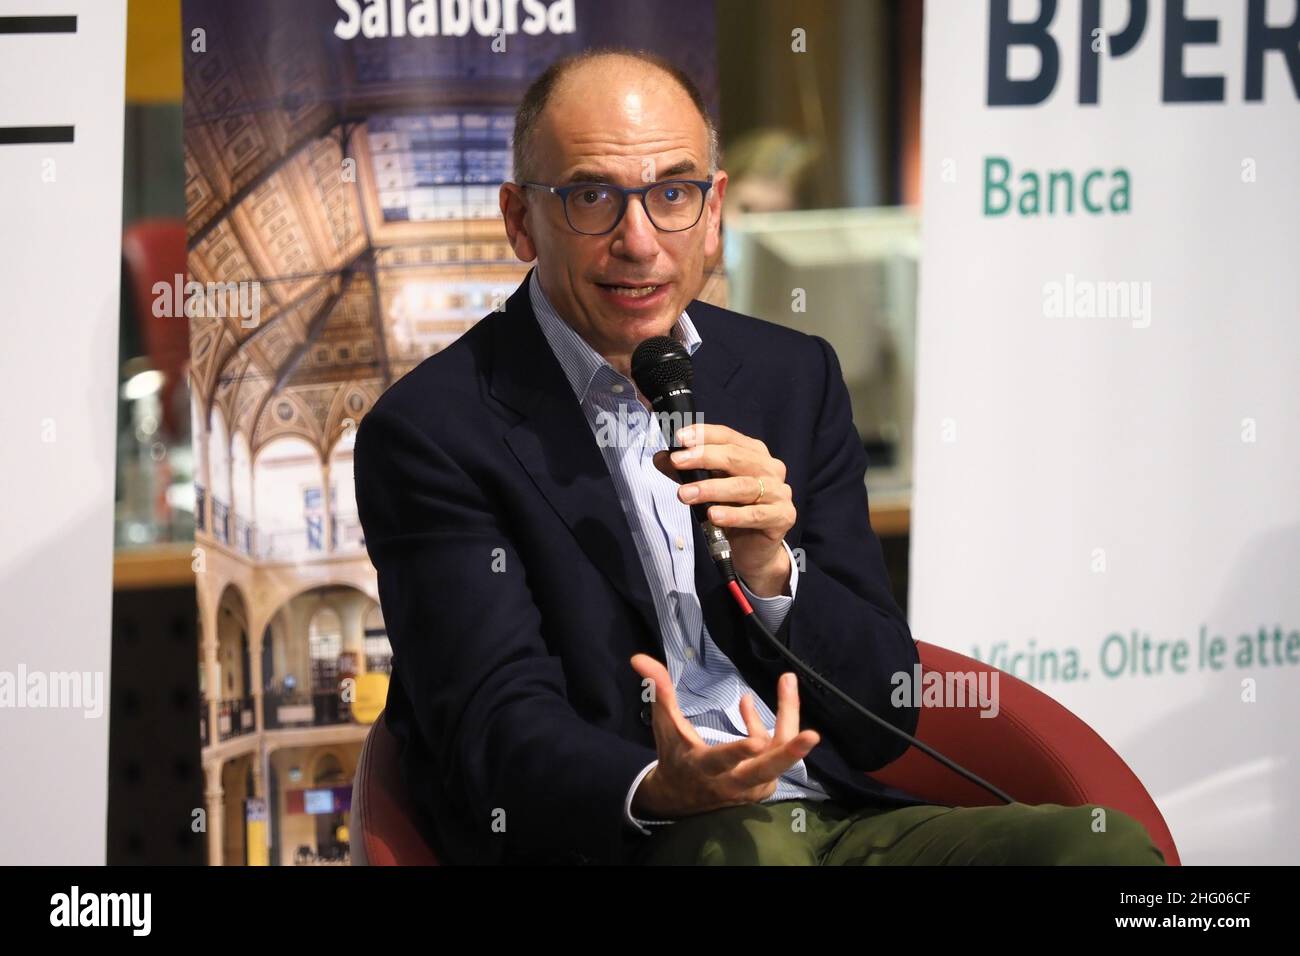 Michele Nucci/LaPresse June 29, 2021 - Bologna, Italy - news in the pic:  Presentation of the new book by the secretary of the PD Enrico Letta with  vice president of the Emilia